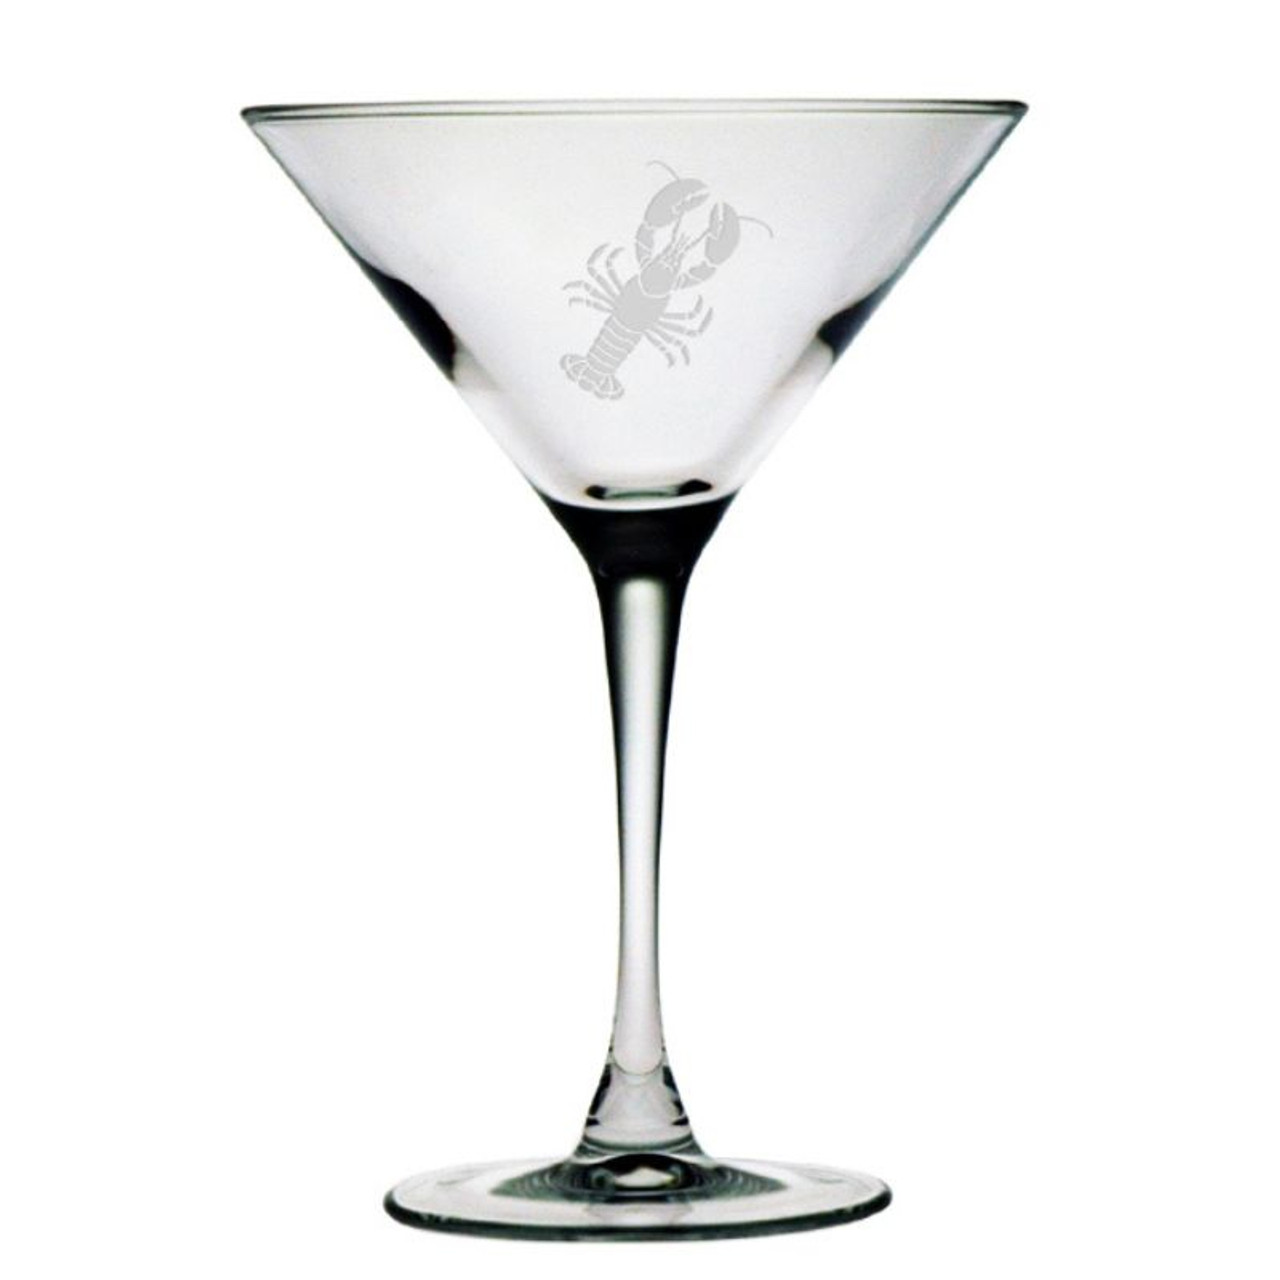 https://cdn11.bigcommerce.com/s-262q5dgaa3/images/stencil/1280x1280/products/11541/22894/martini-glass-with-lobster-set-of-4-4__87034.1661180871.jpg?c=1